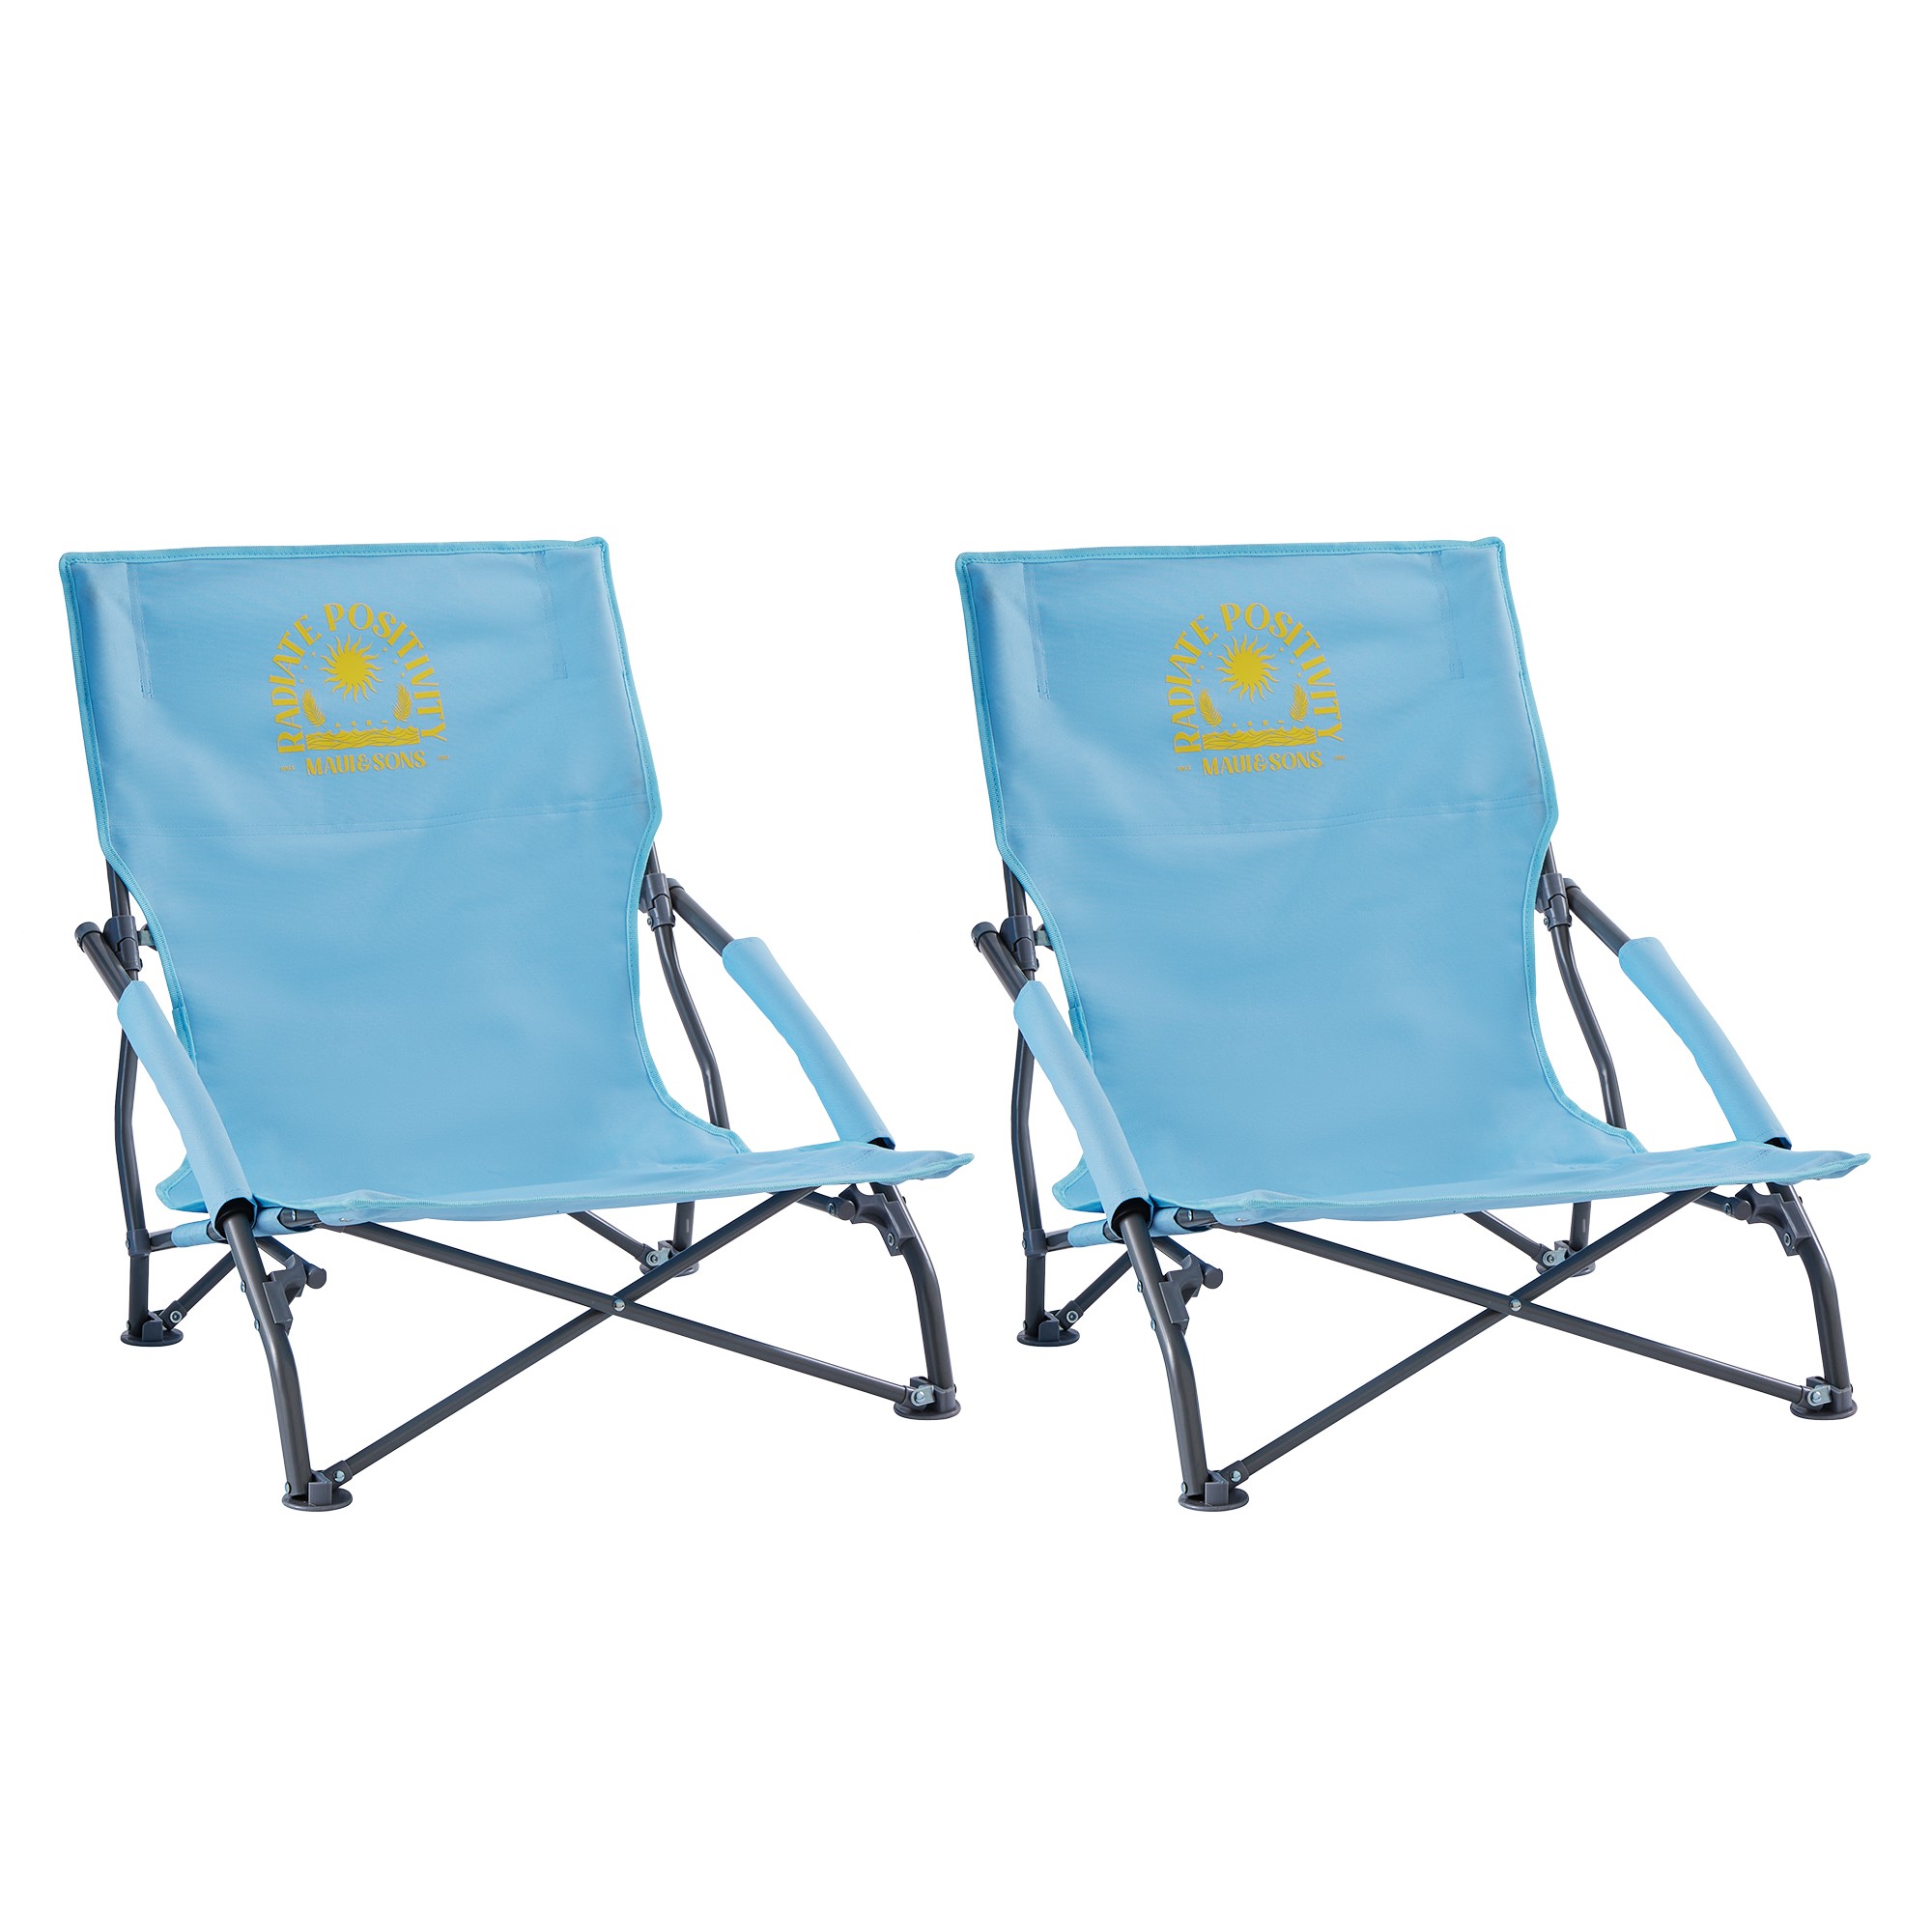 Maui and Sons Comfort Sling Back Bag Beach Camping Picnic  Chairs Set of 2